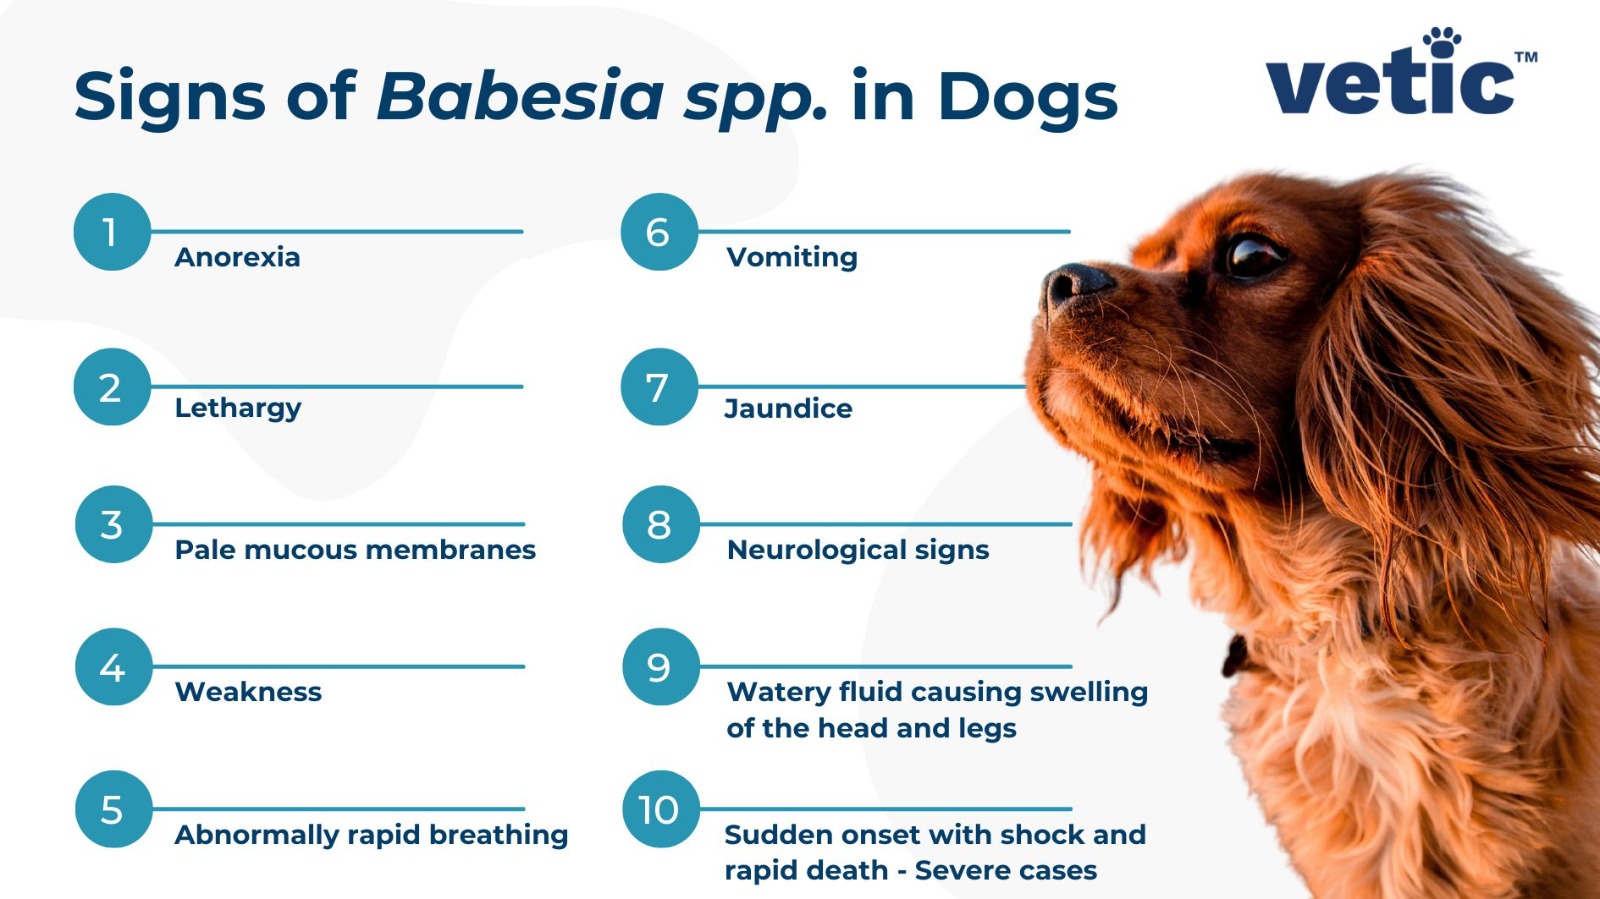 Infographic titled Signs of Babesia infection in Dogs. the common signs of this tick fever in dogs include anorexia, lethargy, pale mucous membrane, weakness, breathing problems, vomiting, jaundice, neurological signs, swelling of the limbs and head, and sudden onset of signs with shock and rapid death.